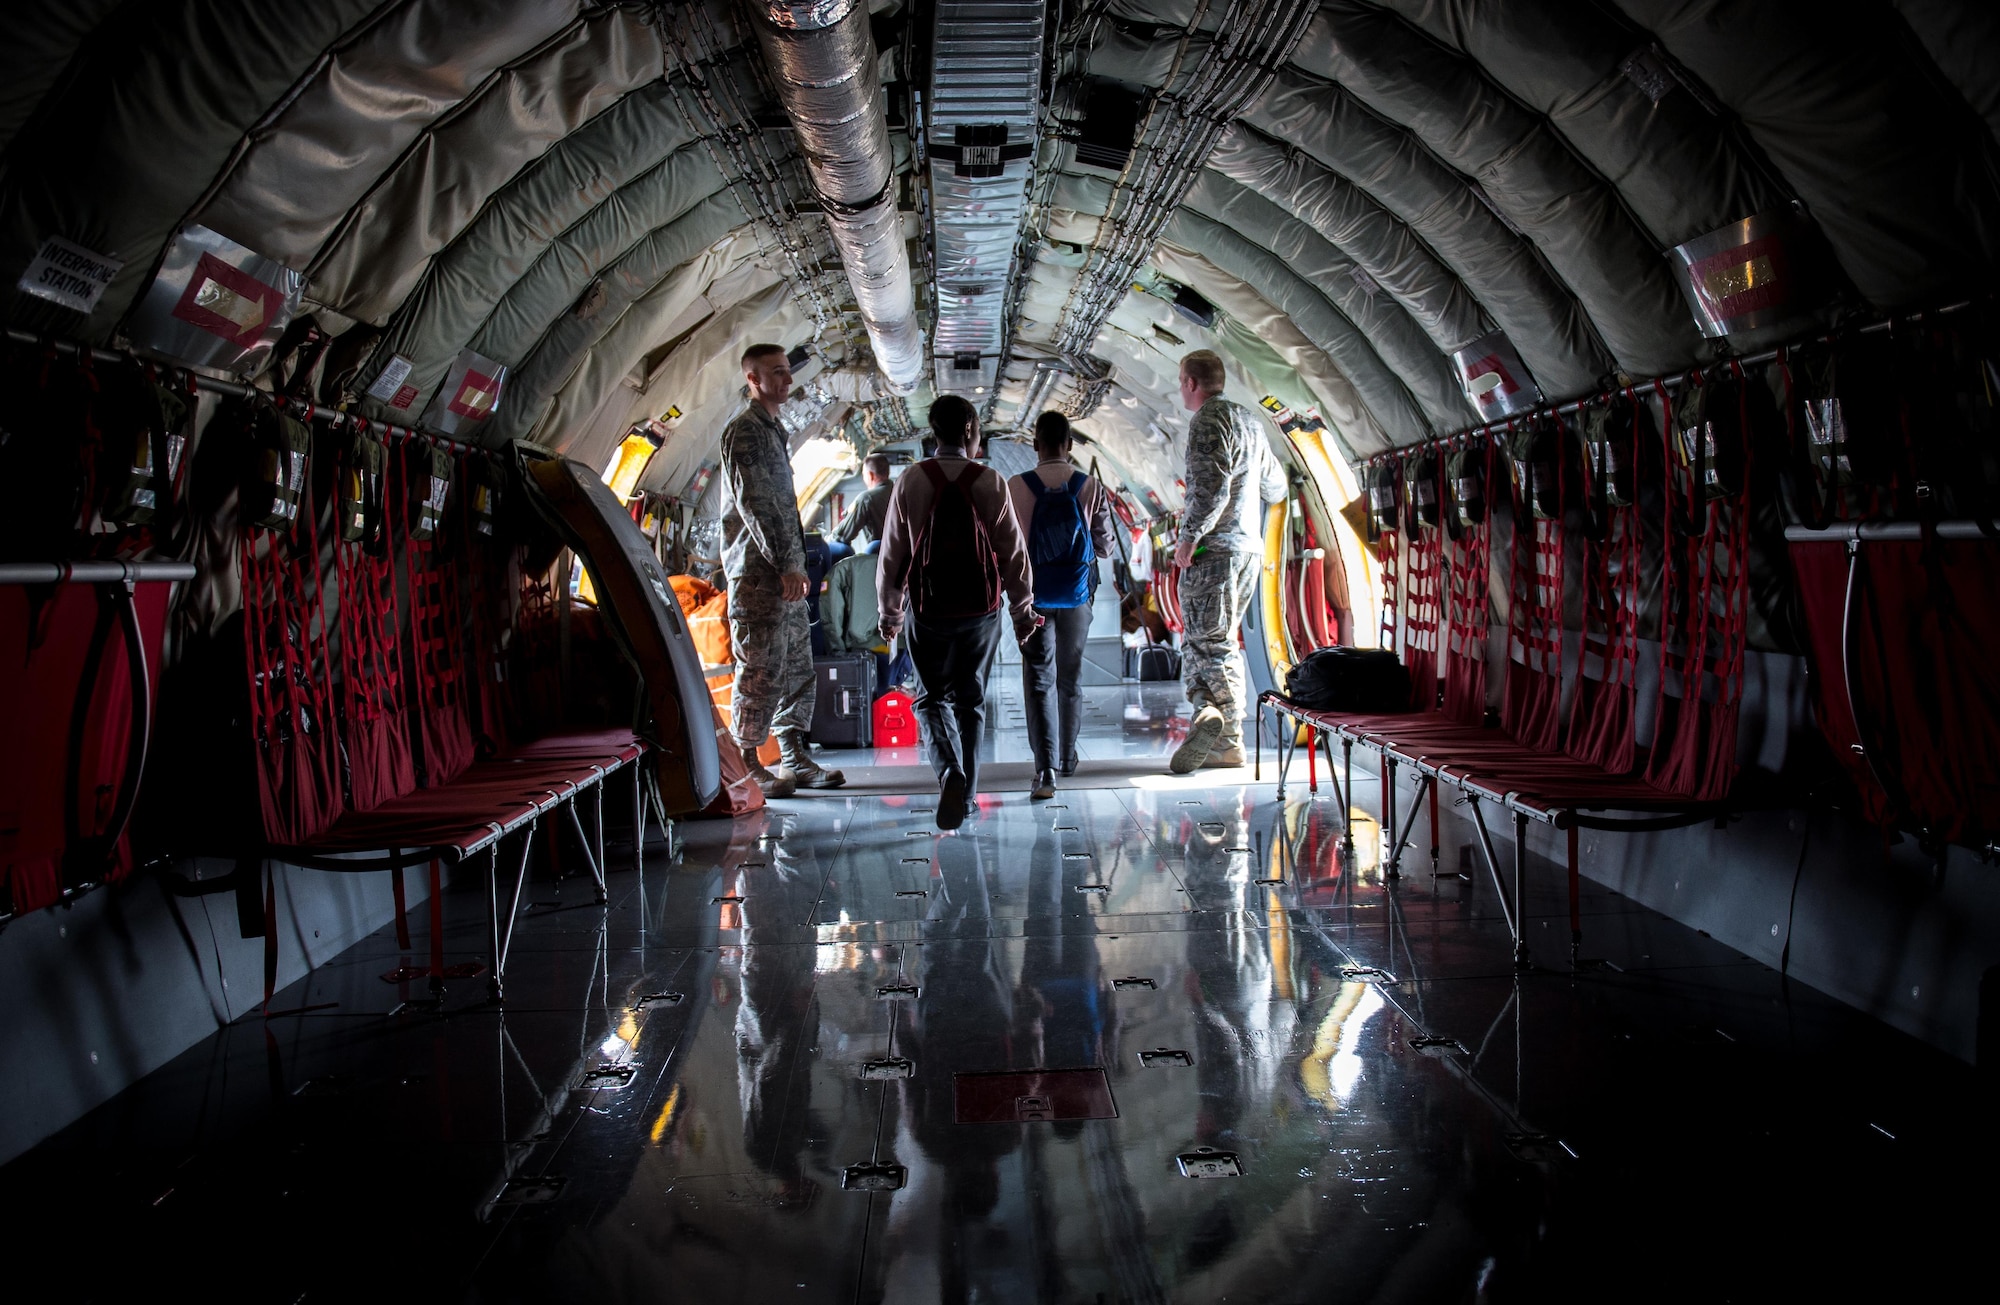 South African students tour a KC-135 Stratotanker from the 507th Air Refueling Wing, Tinker Air Force Base, Oklahoma, at the African Aerospace and Defense Expo at Waterkloof Air Force Base, South Africa, Sept. 14, 2016. The U.S. military is exhibiting a C-17 Globemaster III, a KC-135 Stratotanker, a C-130J Super Hercules, an HC-130 King, and an MQ-9 Reaper. The aircraft come from various Air National Guard and Air Force Reserve Command units. The U.S. routinely participates in events like AADE to strengthen partnerships with regional partners. (U.S. Air Force photo by Tech. Sgt. Ryan Crane)